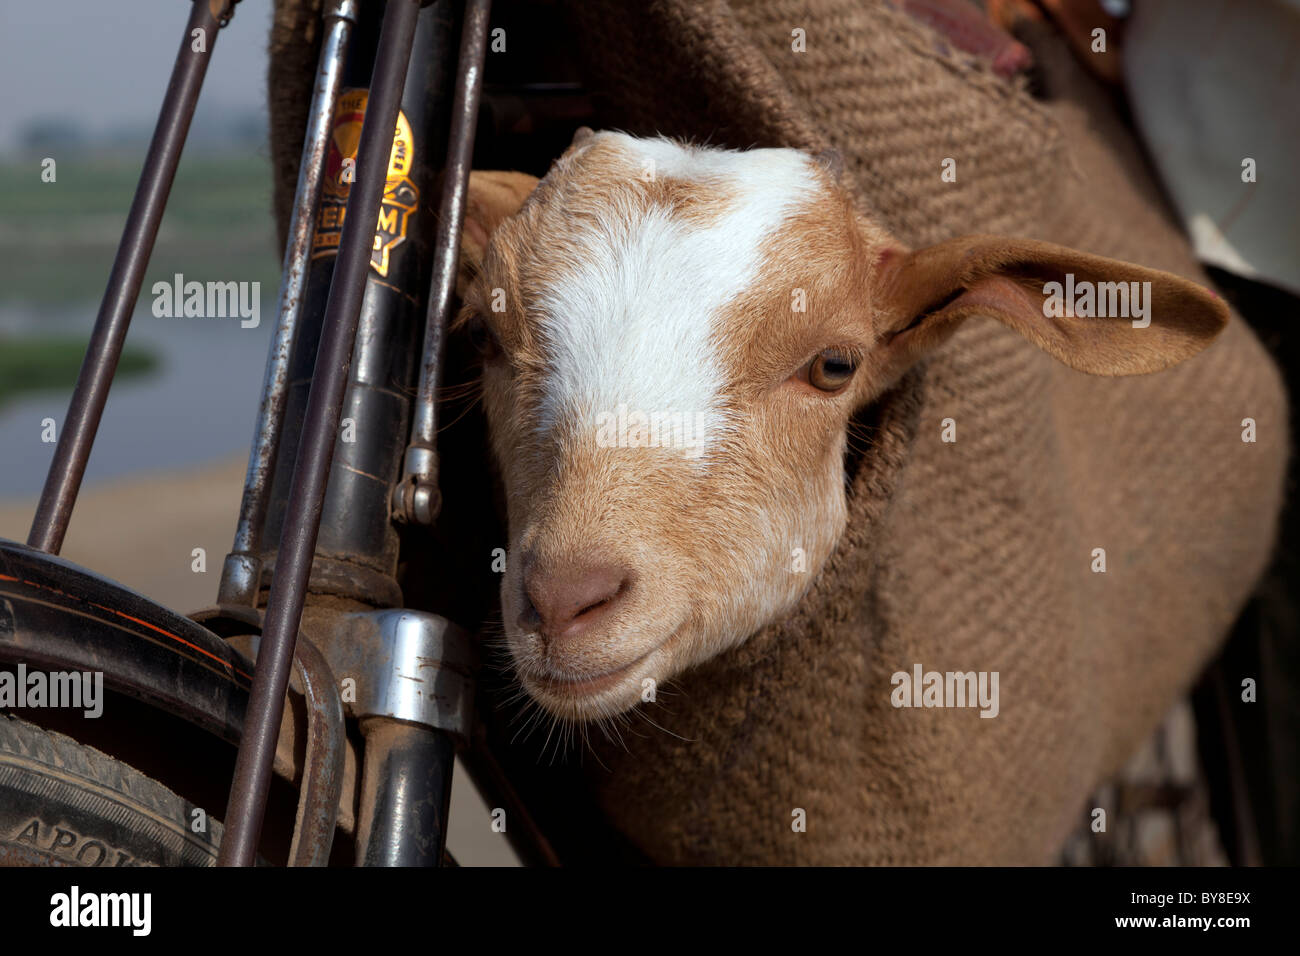 india-uttar-pradesh-agra-close-up-of-a-push-bike-and-a-goat-in-a-sack-BY8E9X.jpg